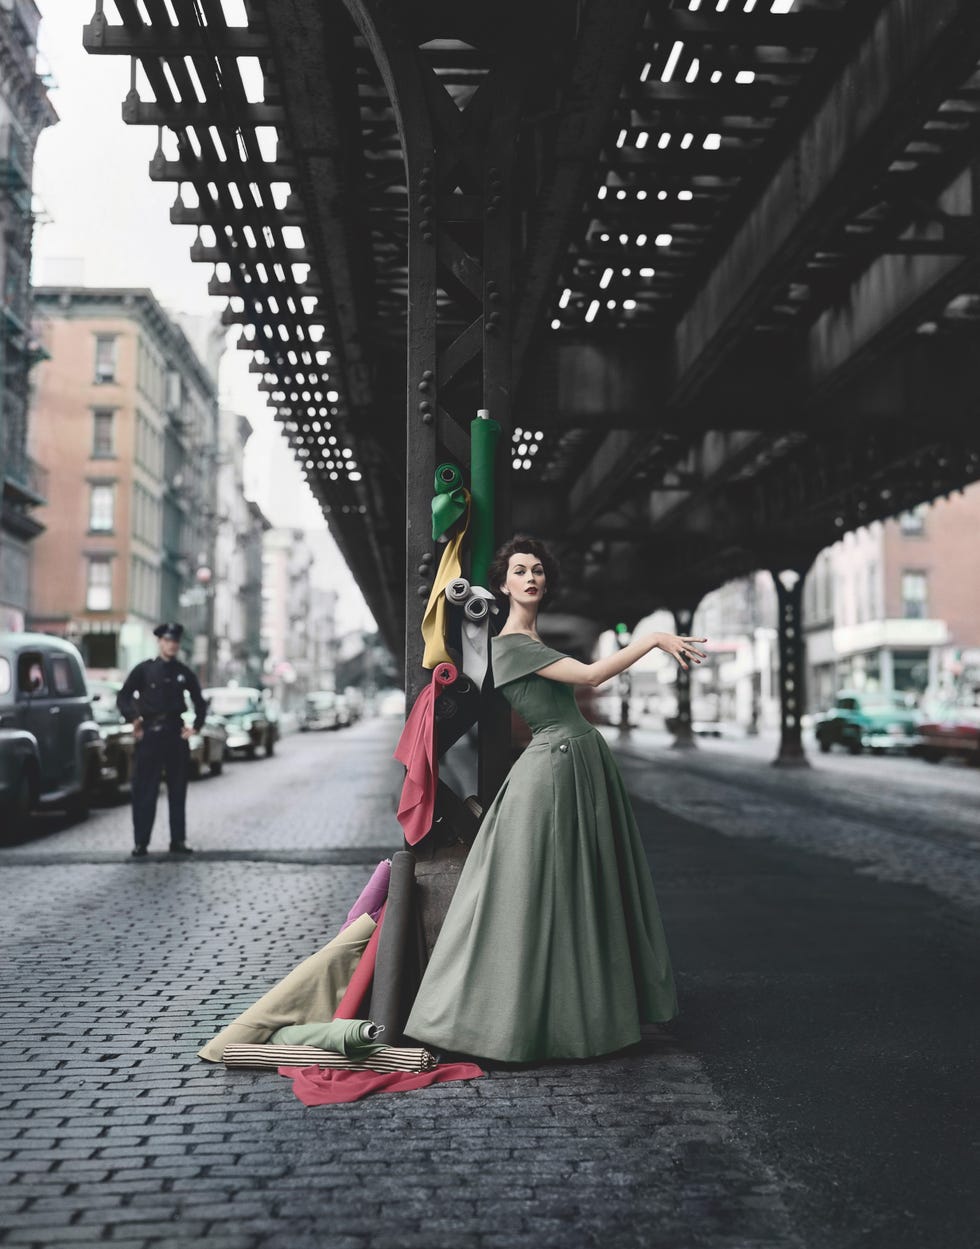 american model dovima posing in a christian dior dress with rolls of fabric, under the elevated railway, 3rd avenue, new york, 1956 for 'dior creates cosmopolitan drama' photo by william helburncorbis via getty images